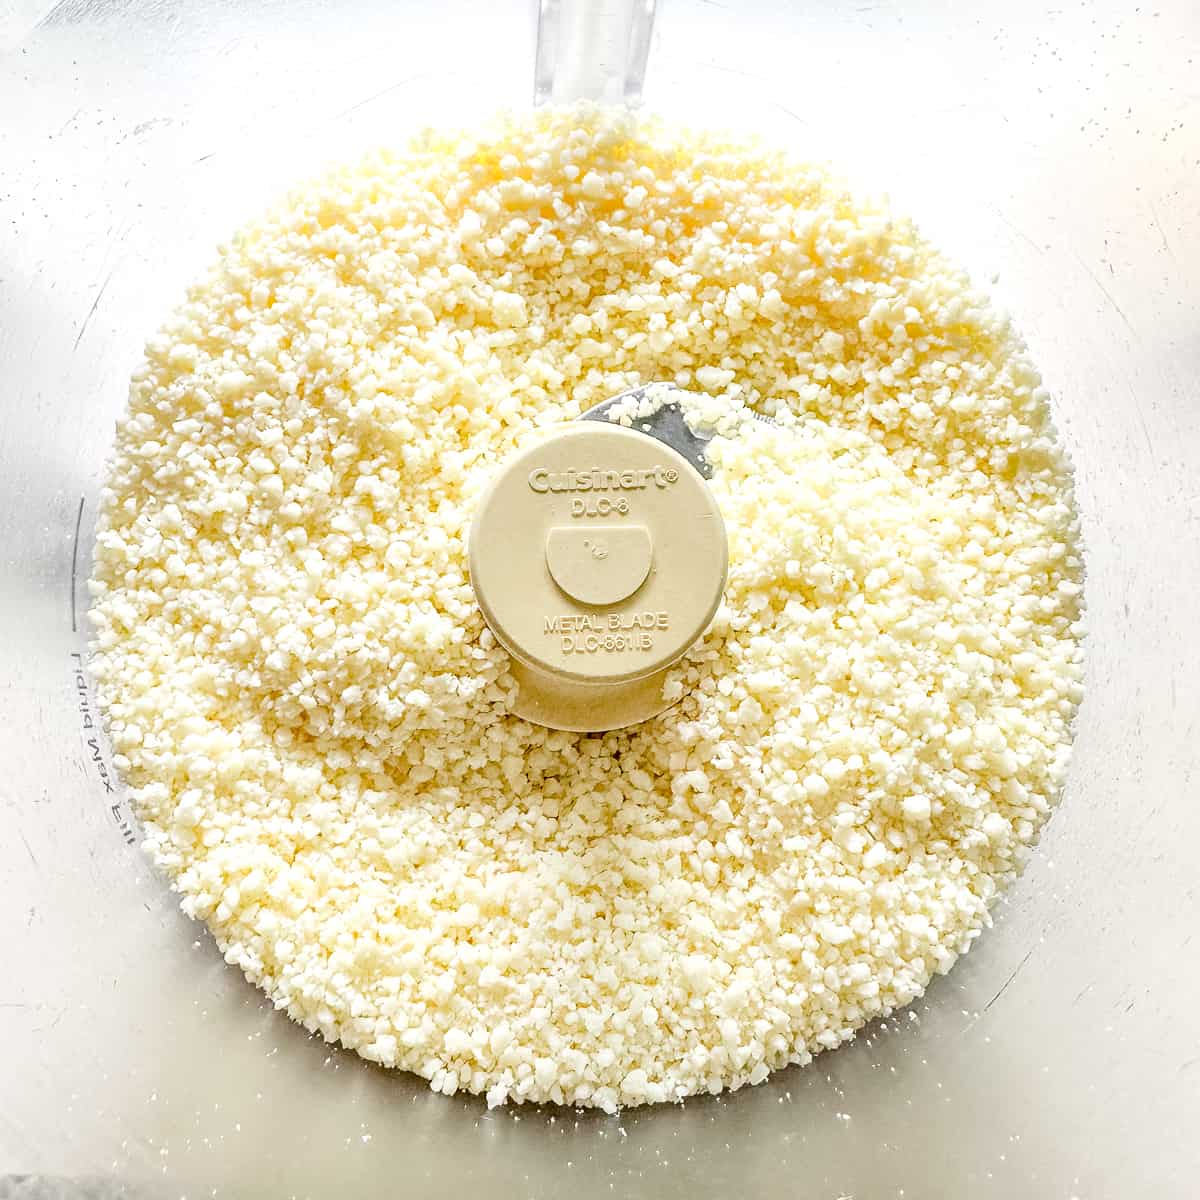 Ground romano cheese in a food processor.